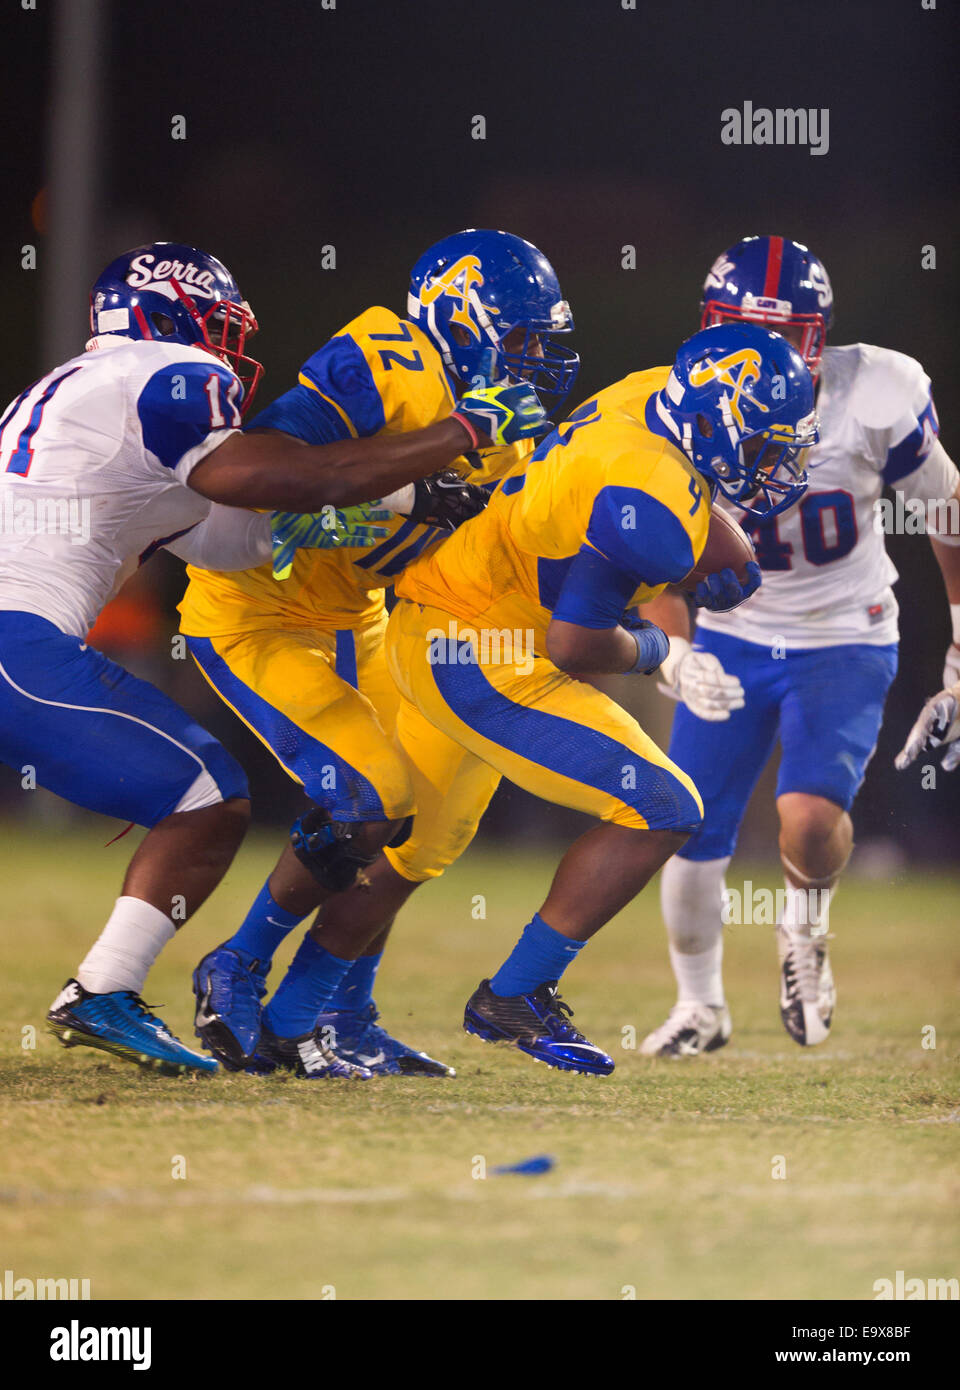 October 4, 2014, La Puente, CA.Bishop Amat lancers running back (4) Torreahno Sweet in action during the Bishop Amat upset of the Cavaliers at Bishop Amat high school on October 3, 2014. The Cavaliers who are usually a nationally ranked high school football team, were upset by Bishop Amat 14 - 7. (Mandatory Credit: Ed Ruvalcaba/MarinMedia.org) (Complete photographer, and company credit required) Stock Photo